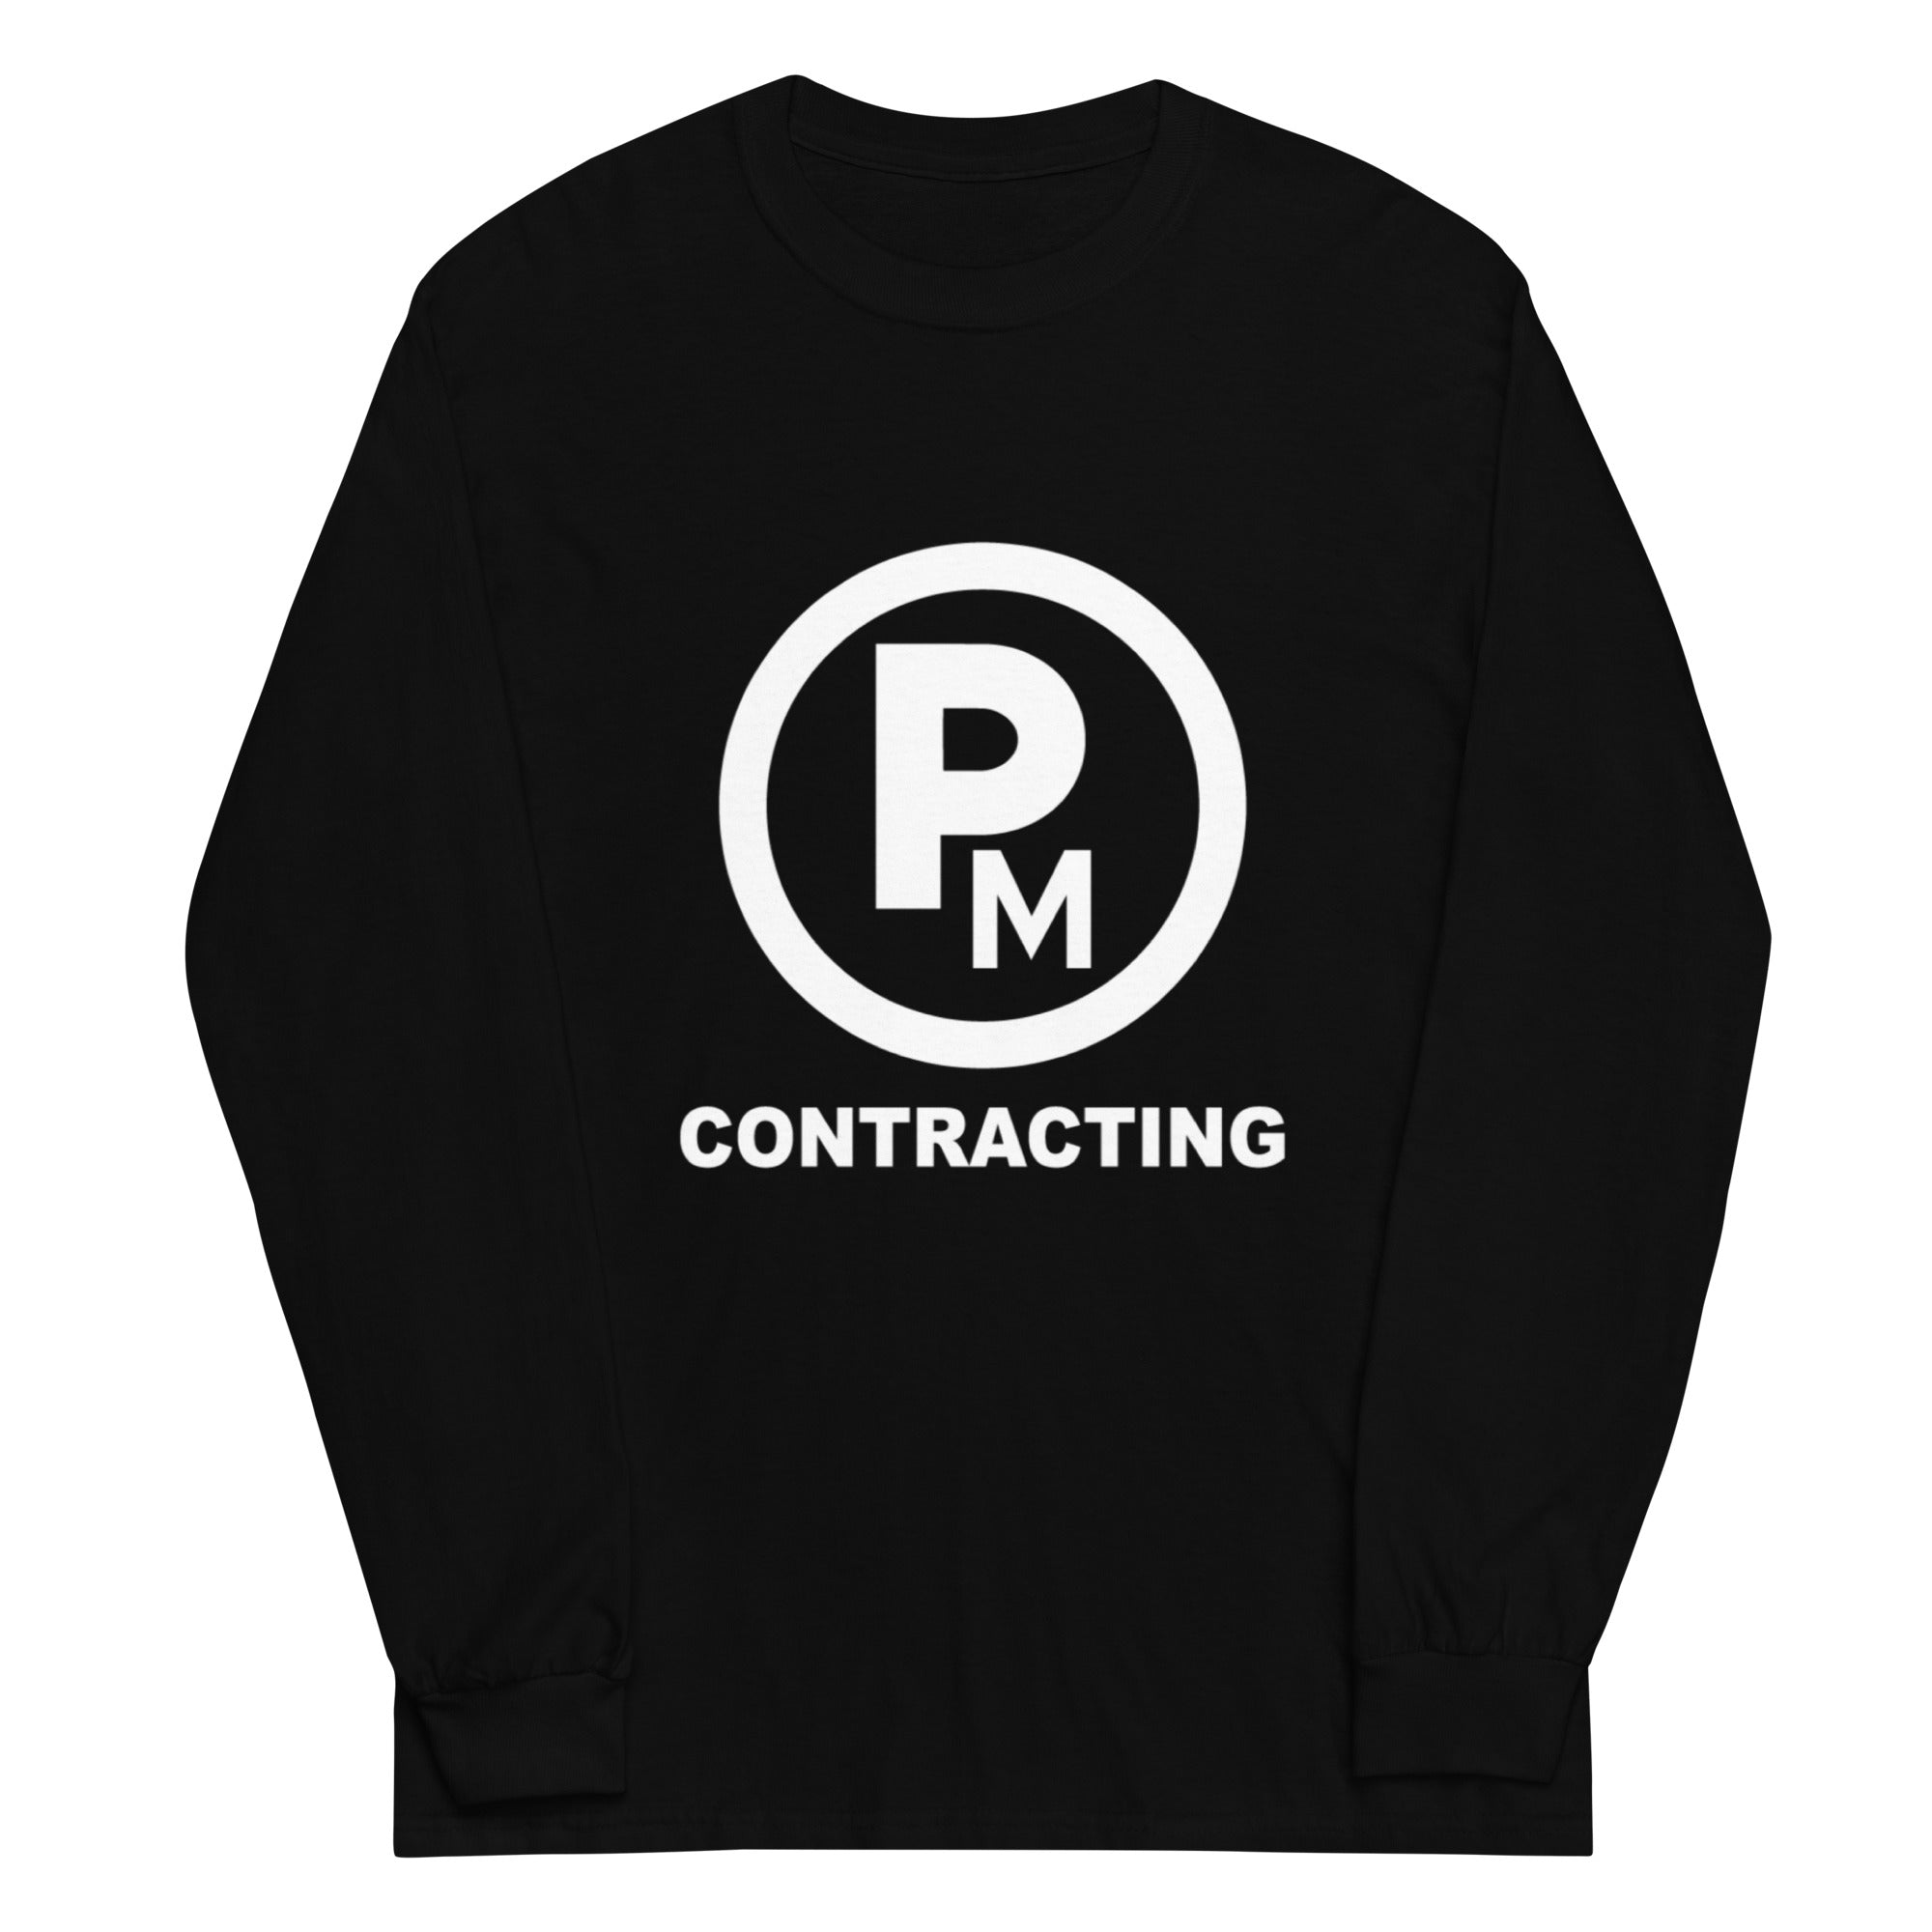 PM Contracting Mens Long Sleeve Shirt